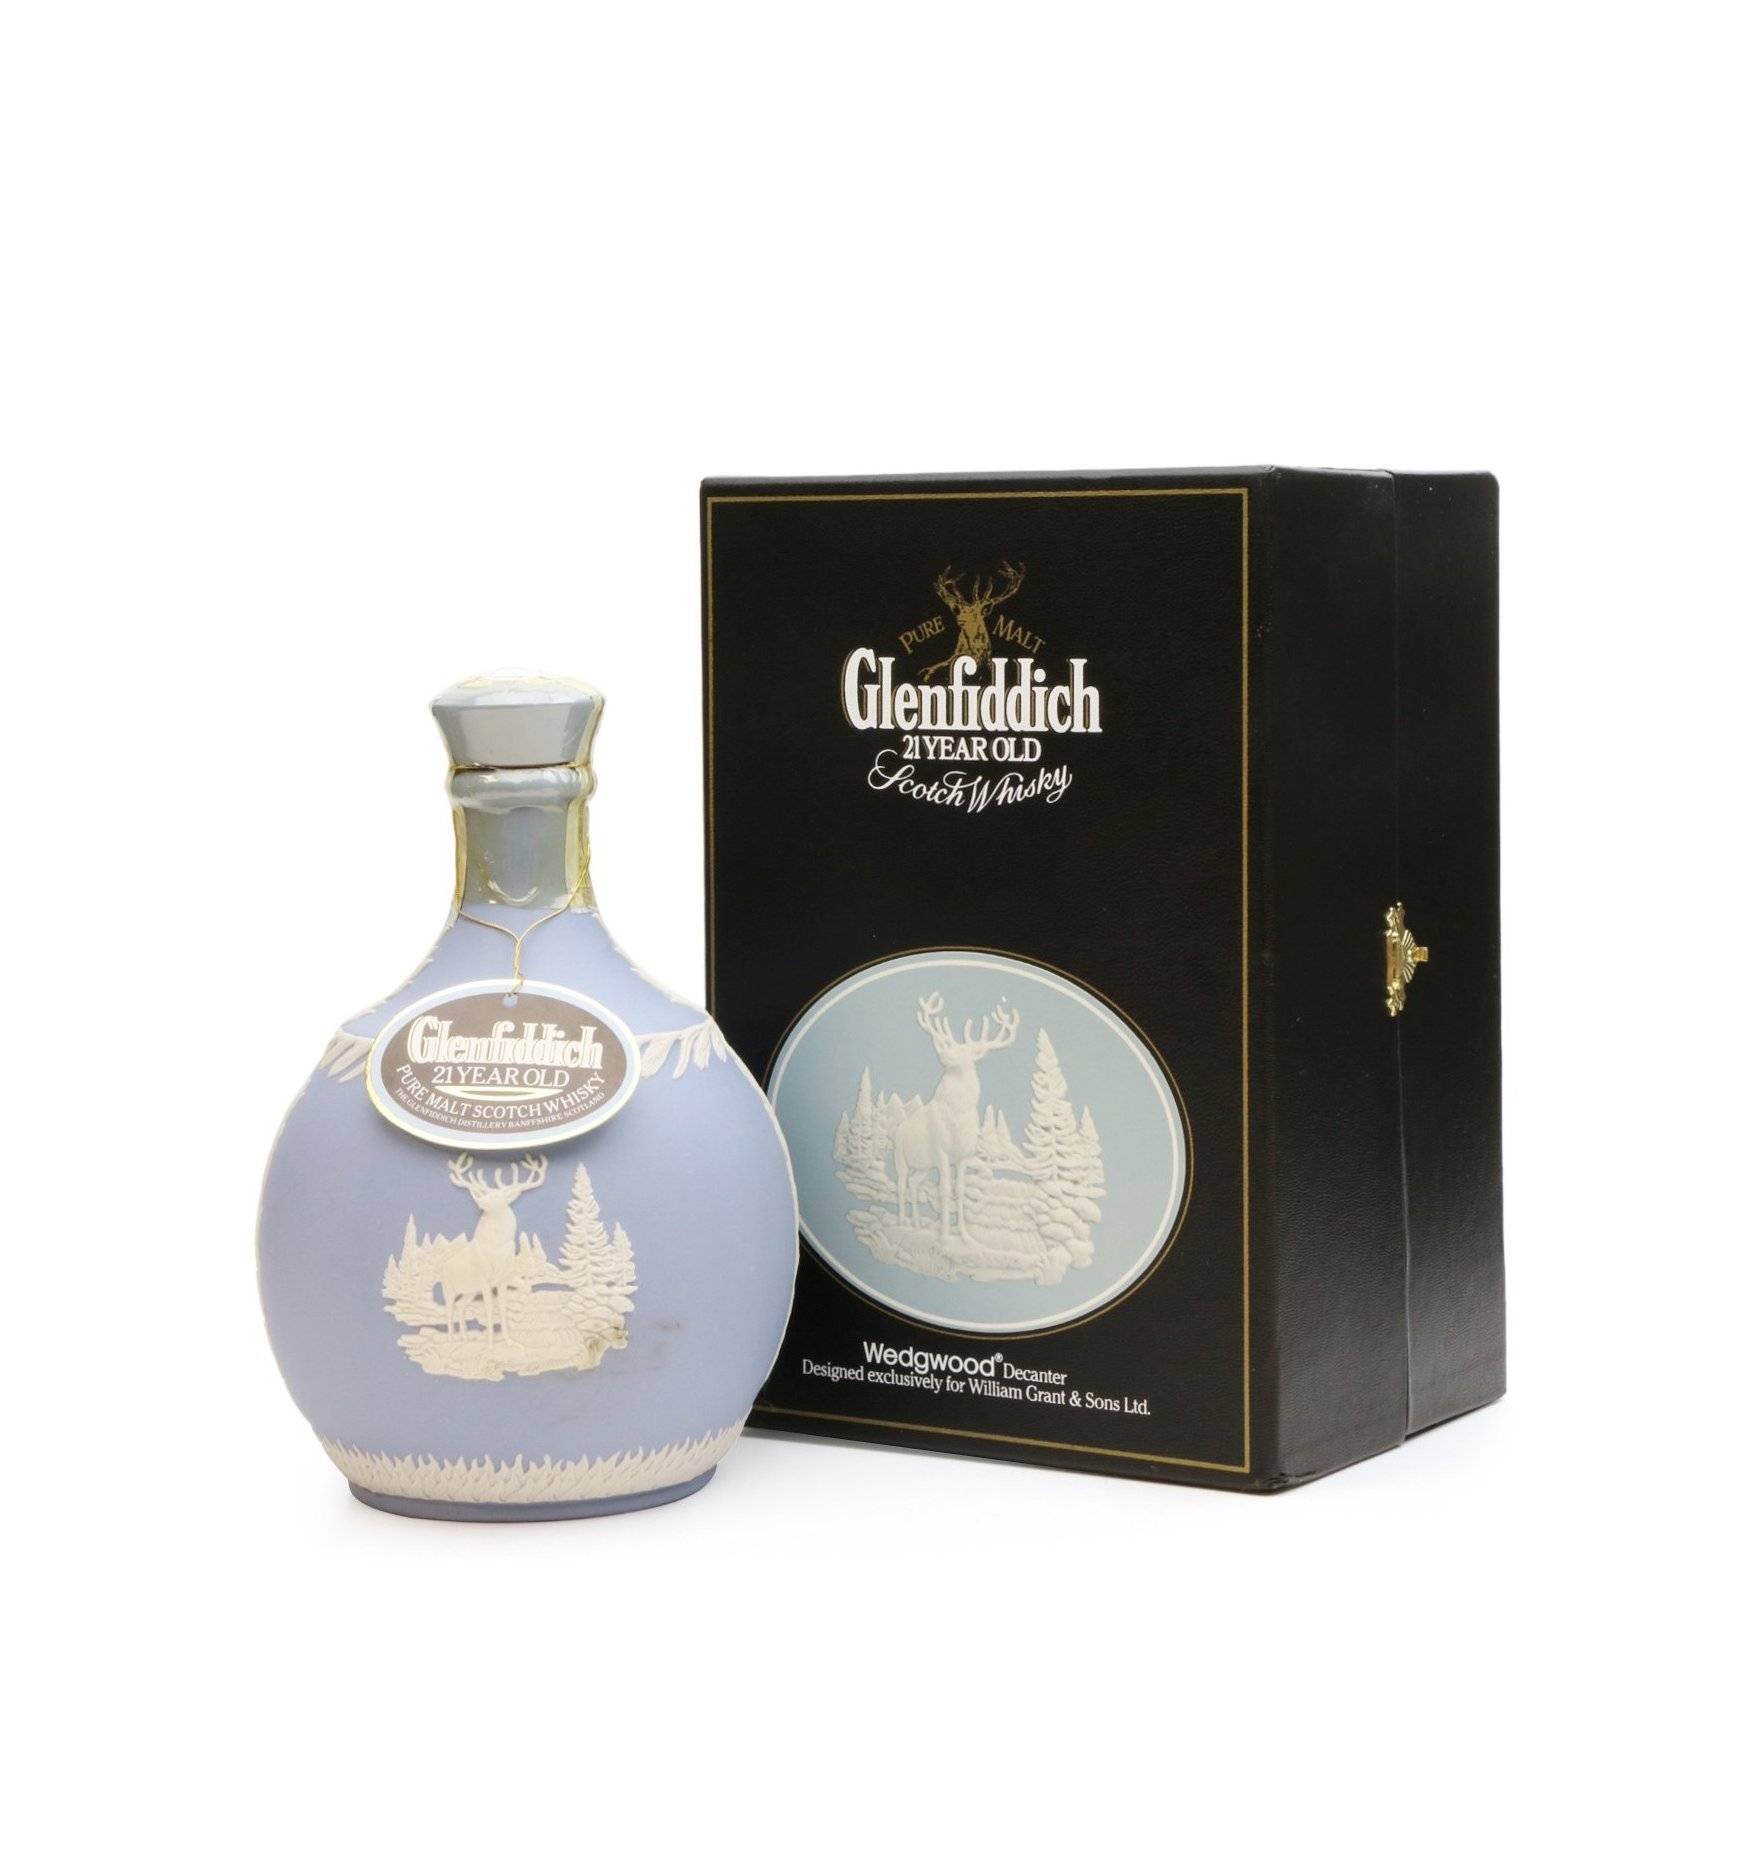 Glenfiddich 21 Years Old - Wedgewood Decanter - Just Whisky Auctions